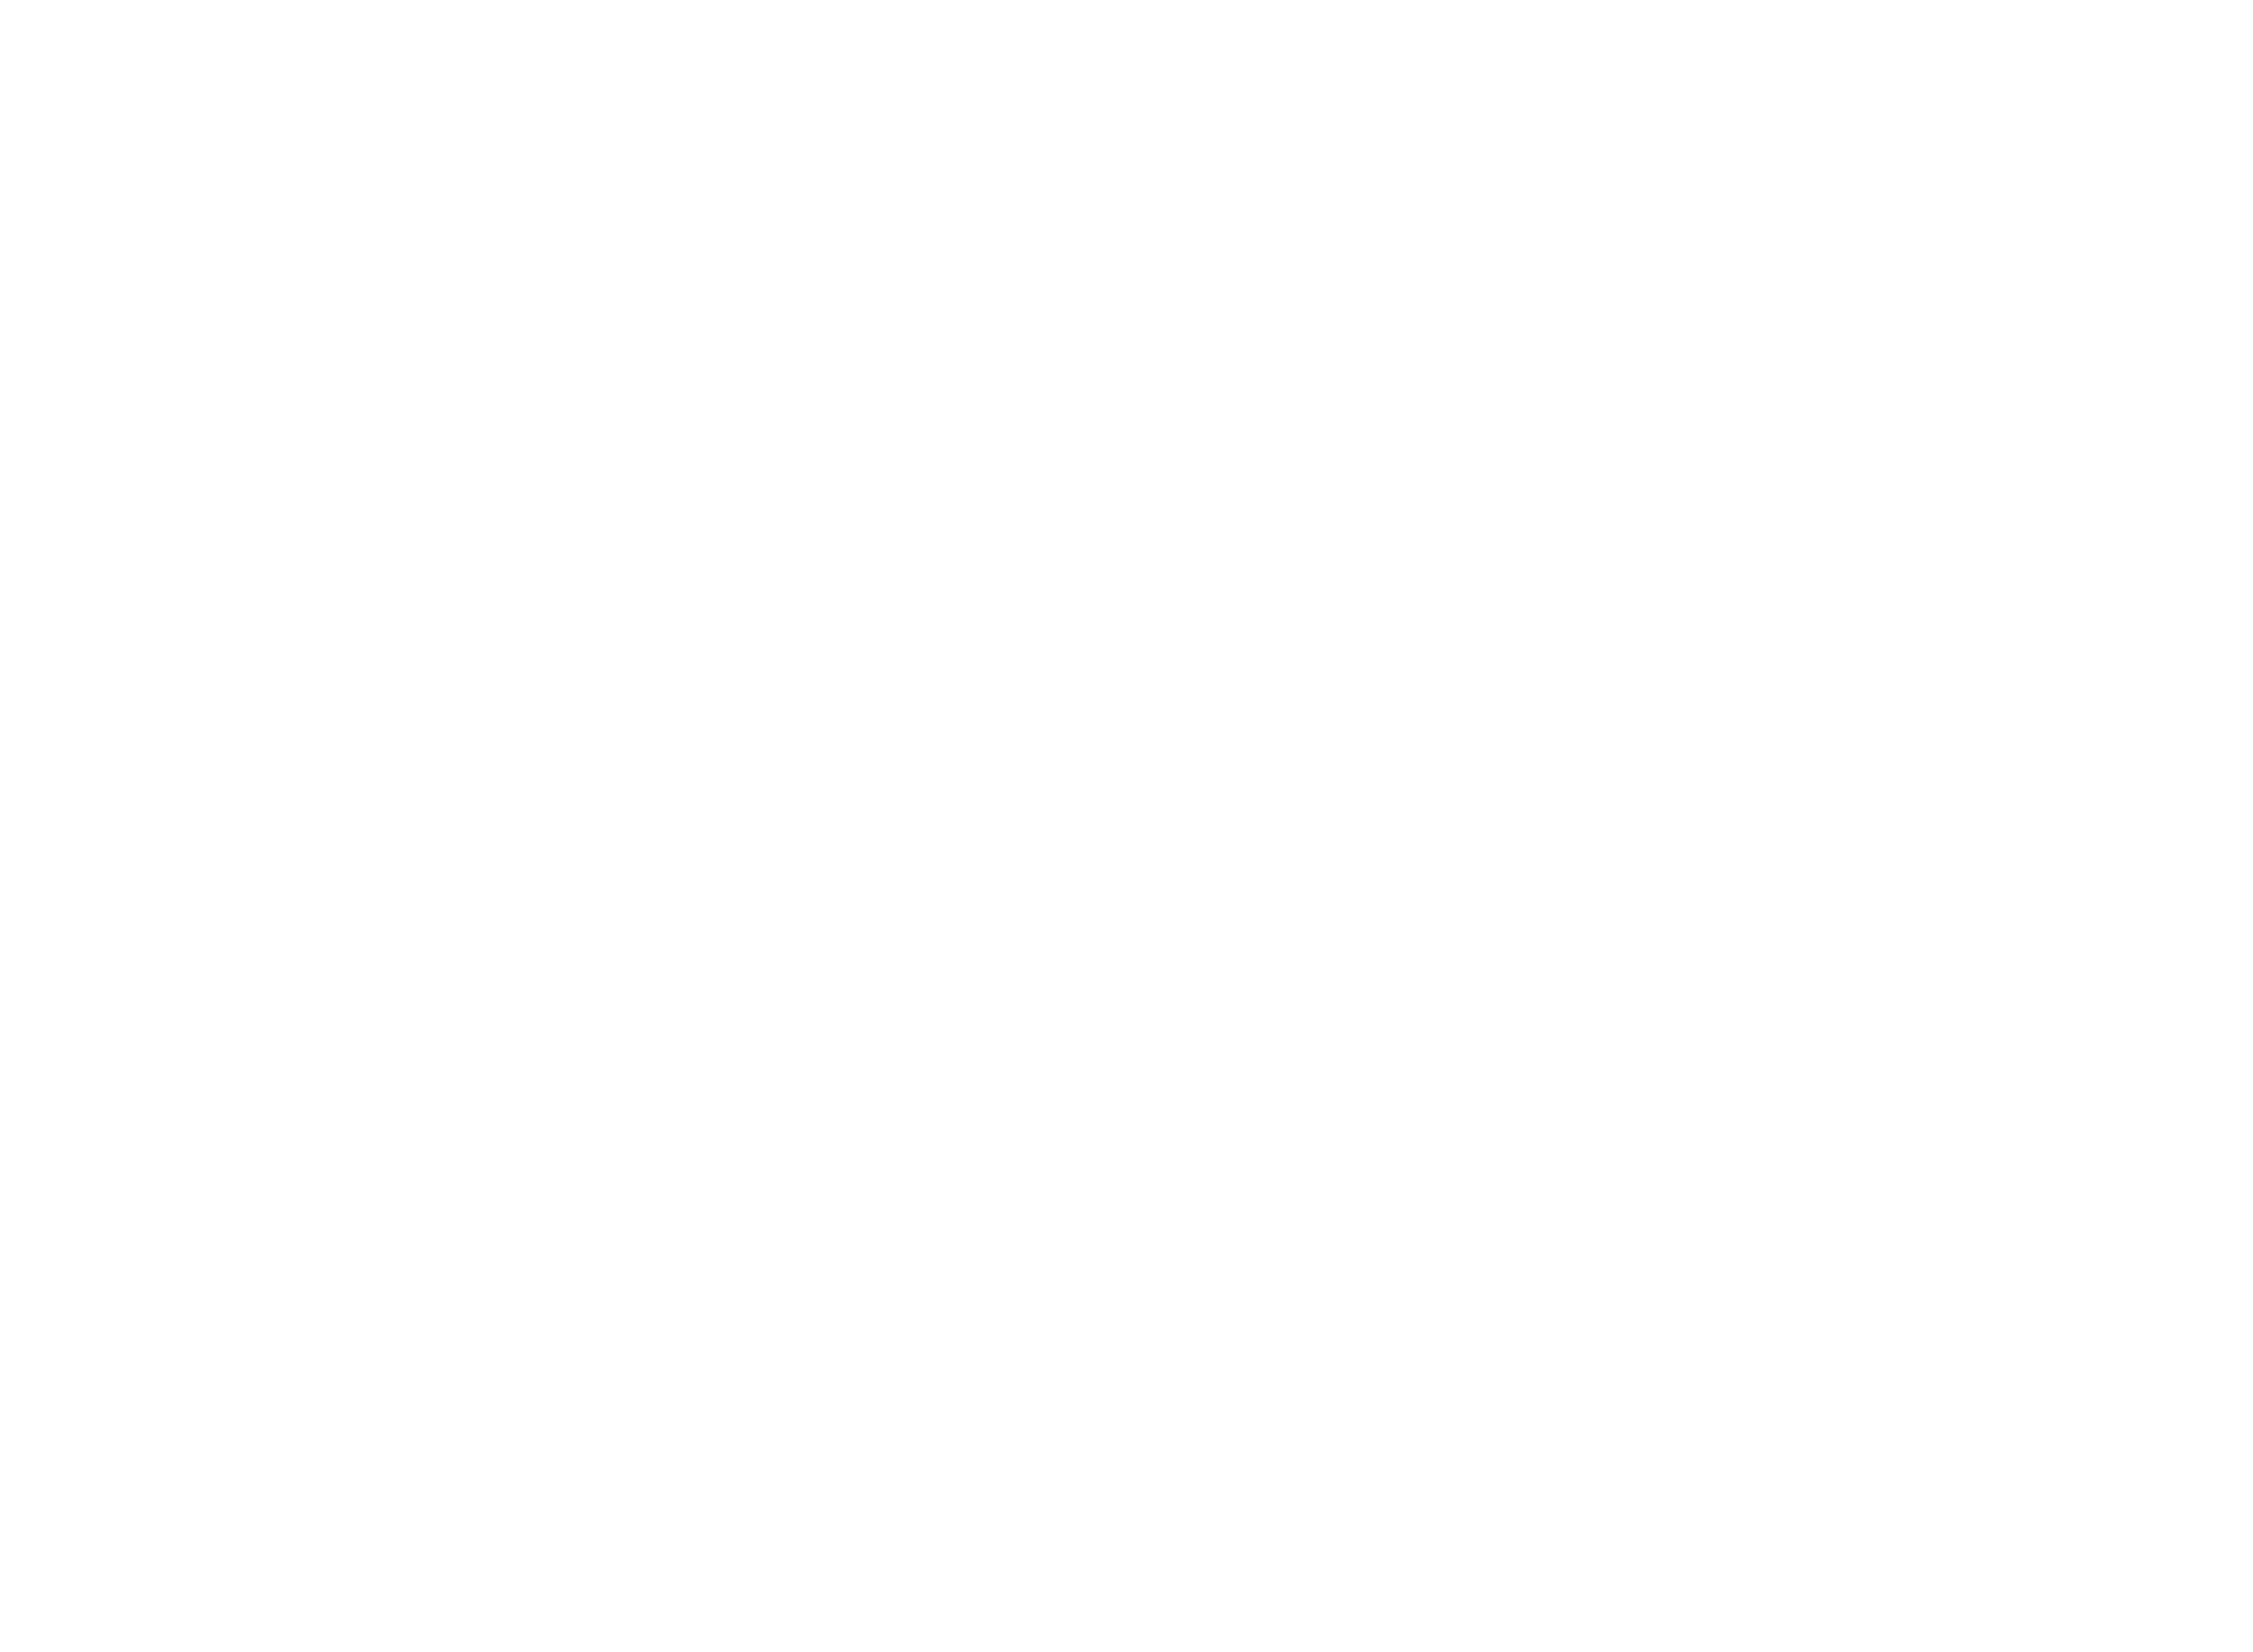 W. Moy Photography